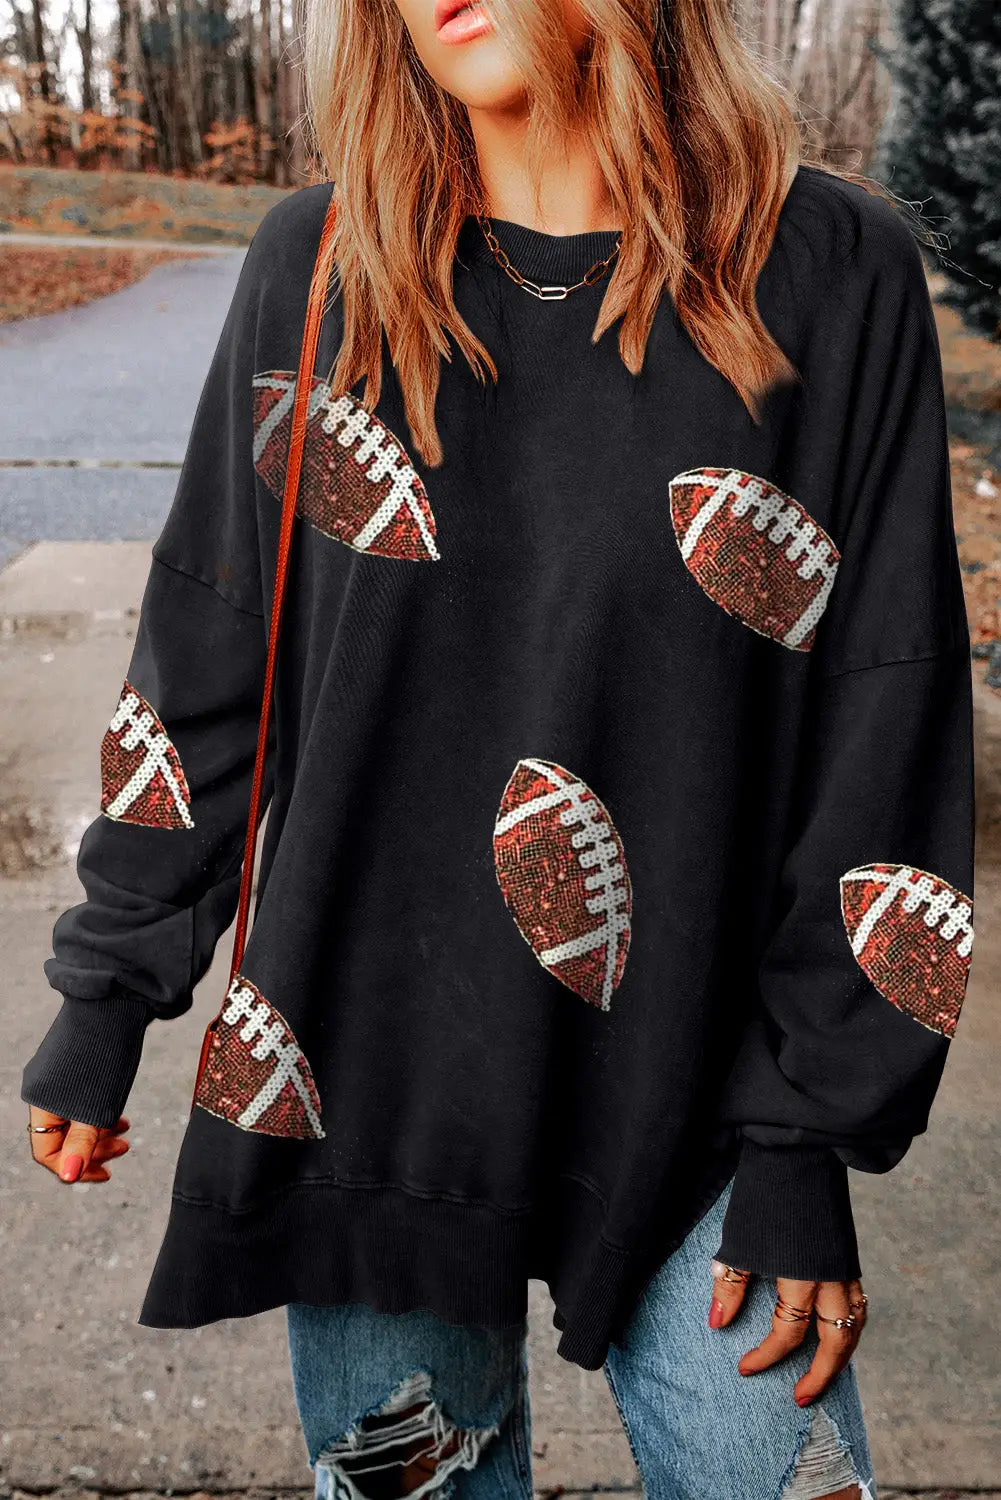 Black sequin fringed rugby casual sweatshirt - black3 / 2xl / 70% polyester + 30% cotton - graphic